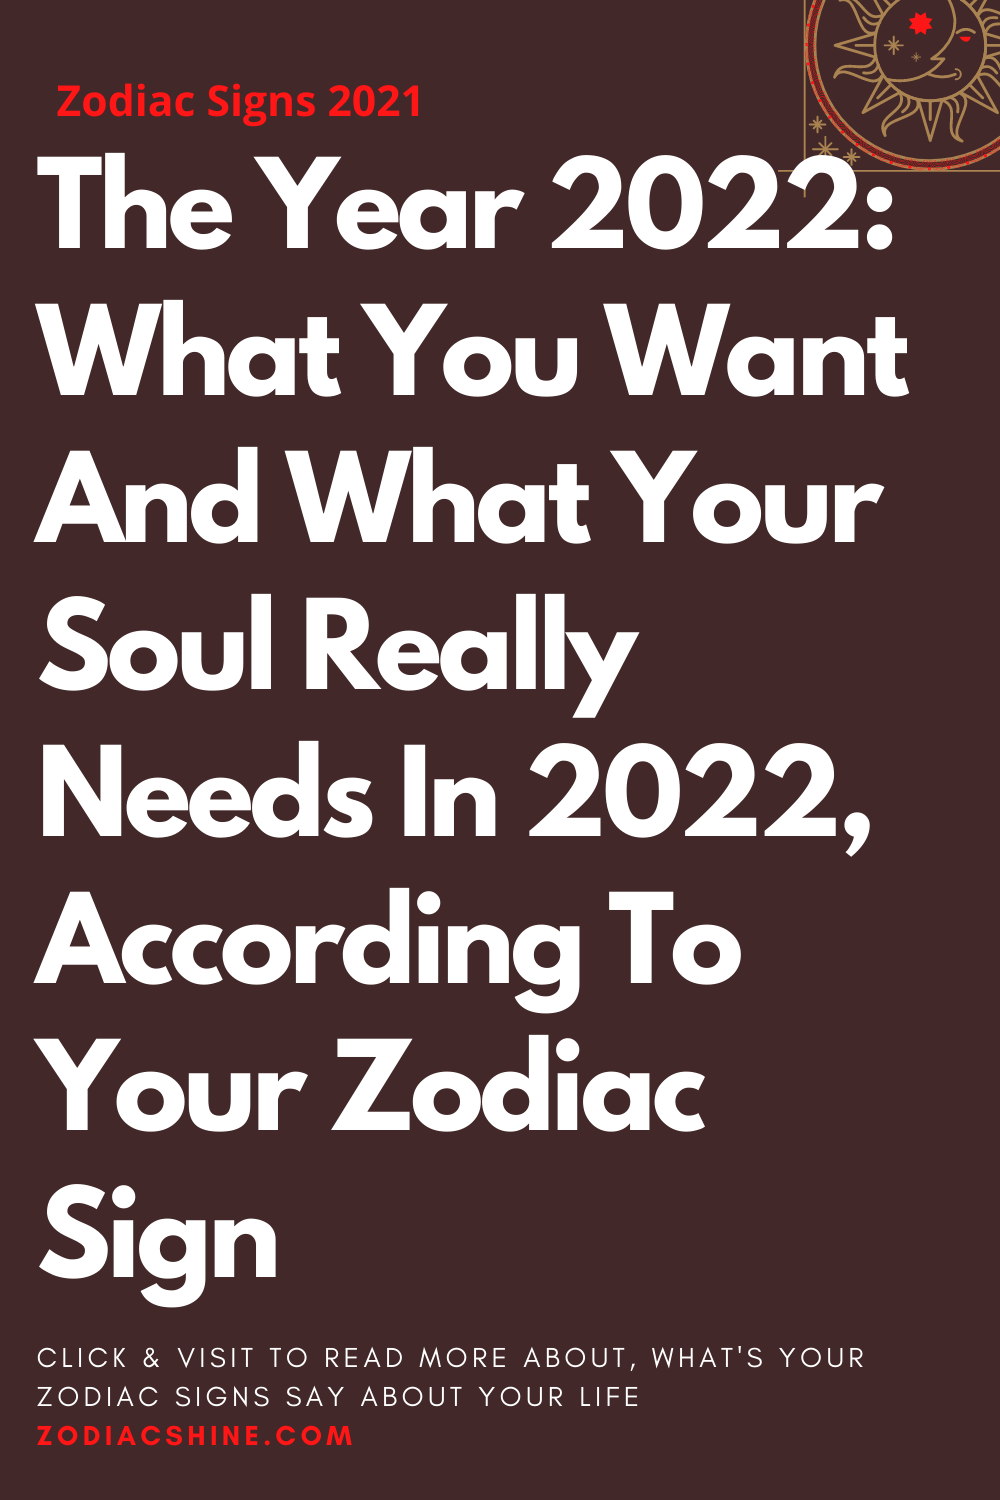 The Year 2022: What You Want And What Your Soul Really Needs In 2022 According To Your Zodiac Sign